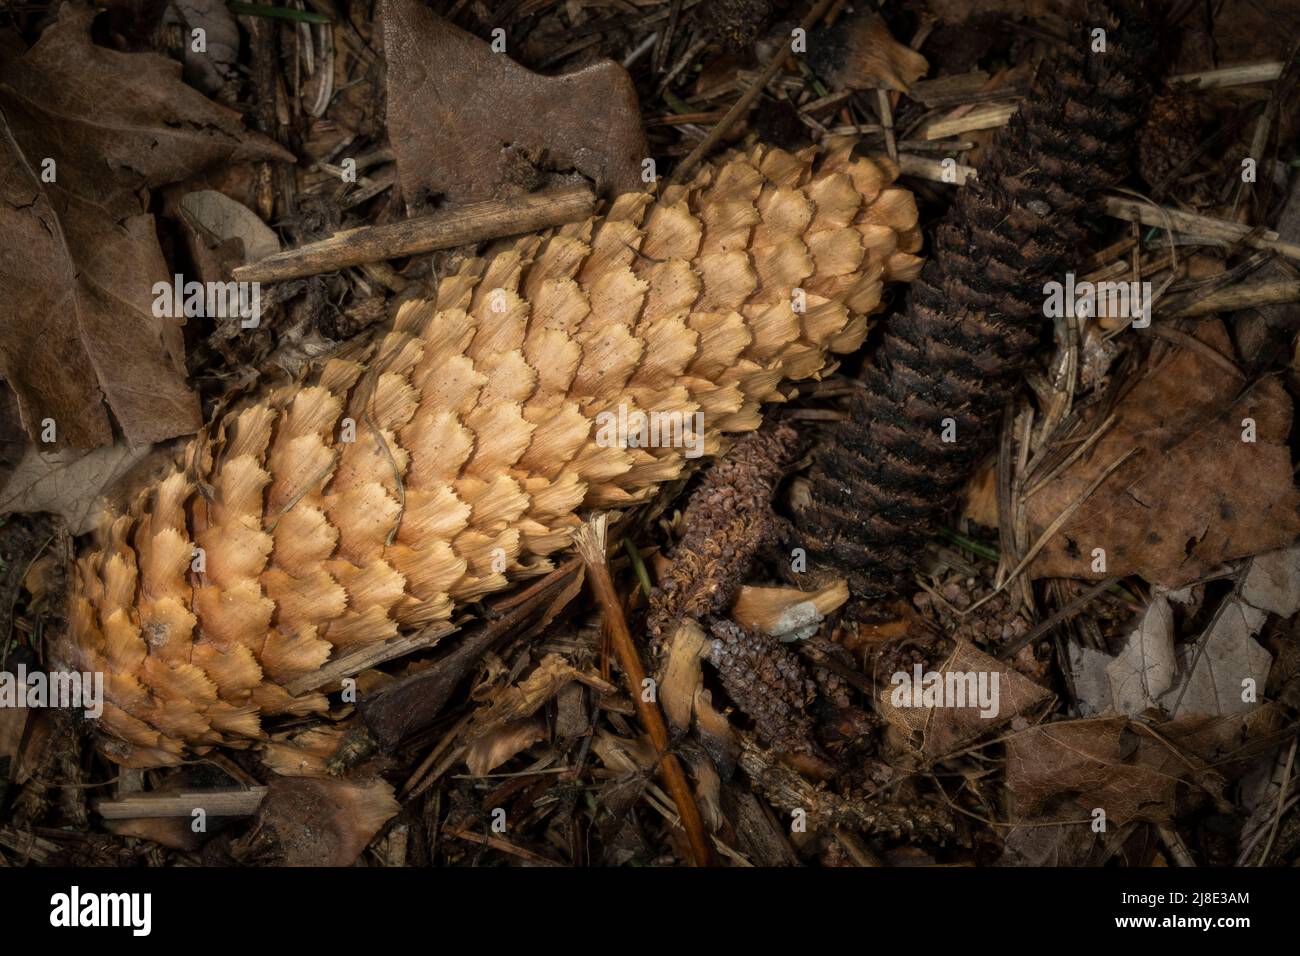 Coniferous cones on the forest floor in autumn. Stock Photo